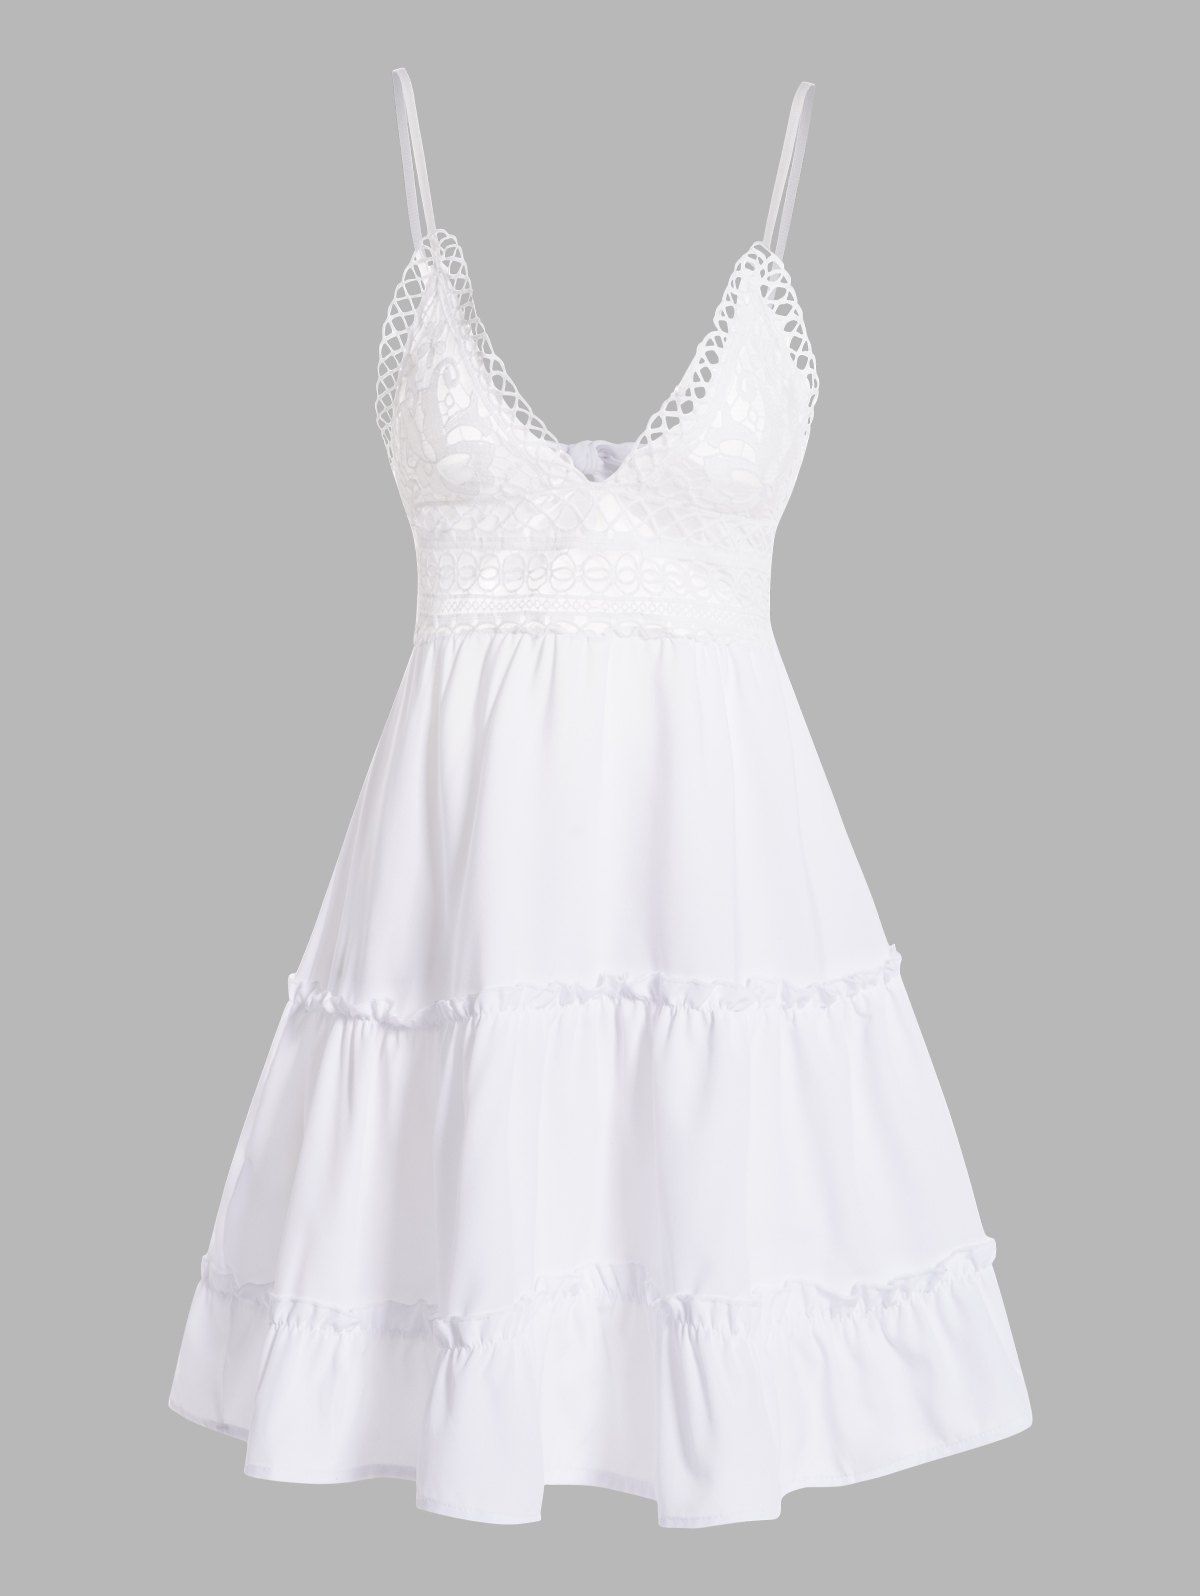 Floral Lace Panel Vacation Mini Dress Adjustable Strap Bowknot Ruffles Backless Plunge A Line Dress - WHITE XL